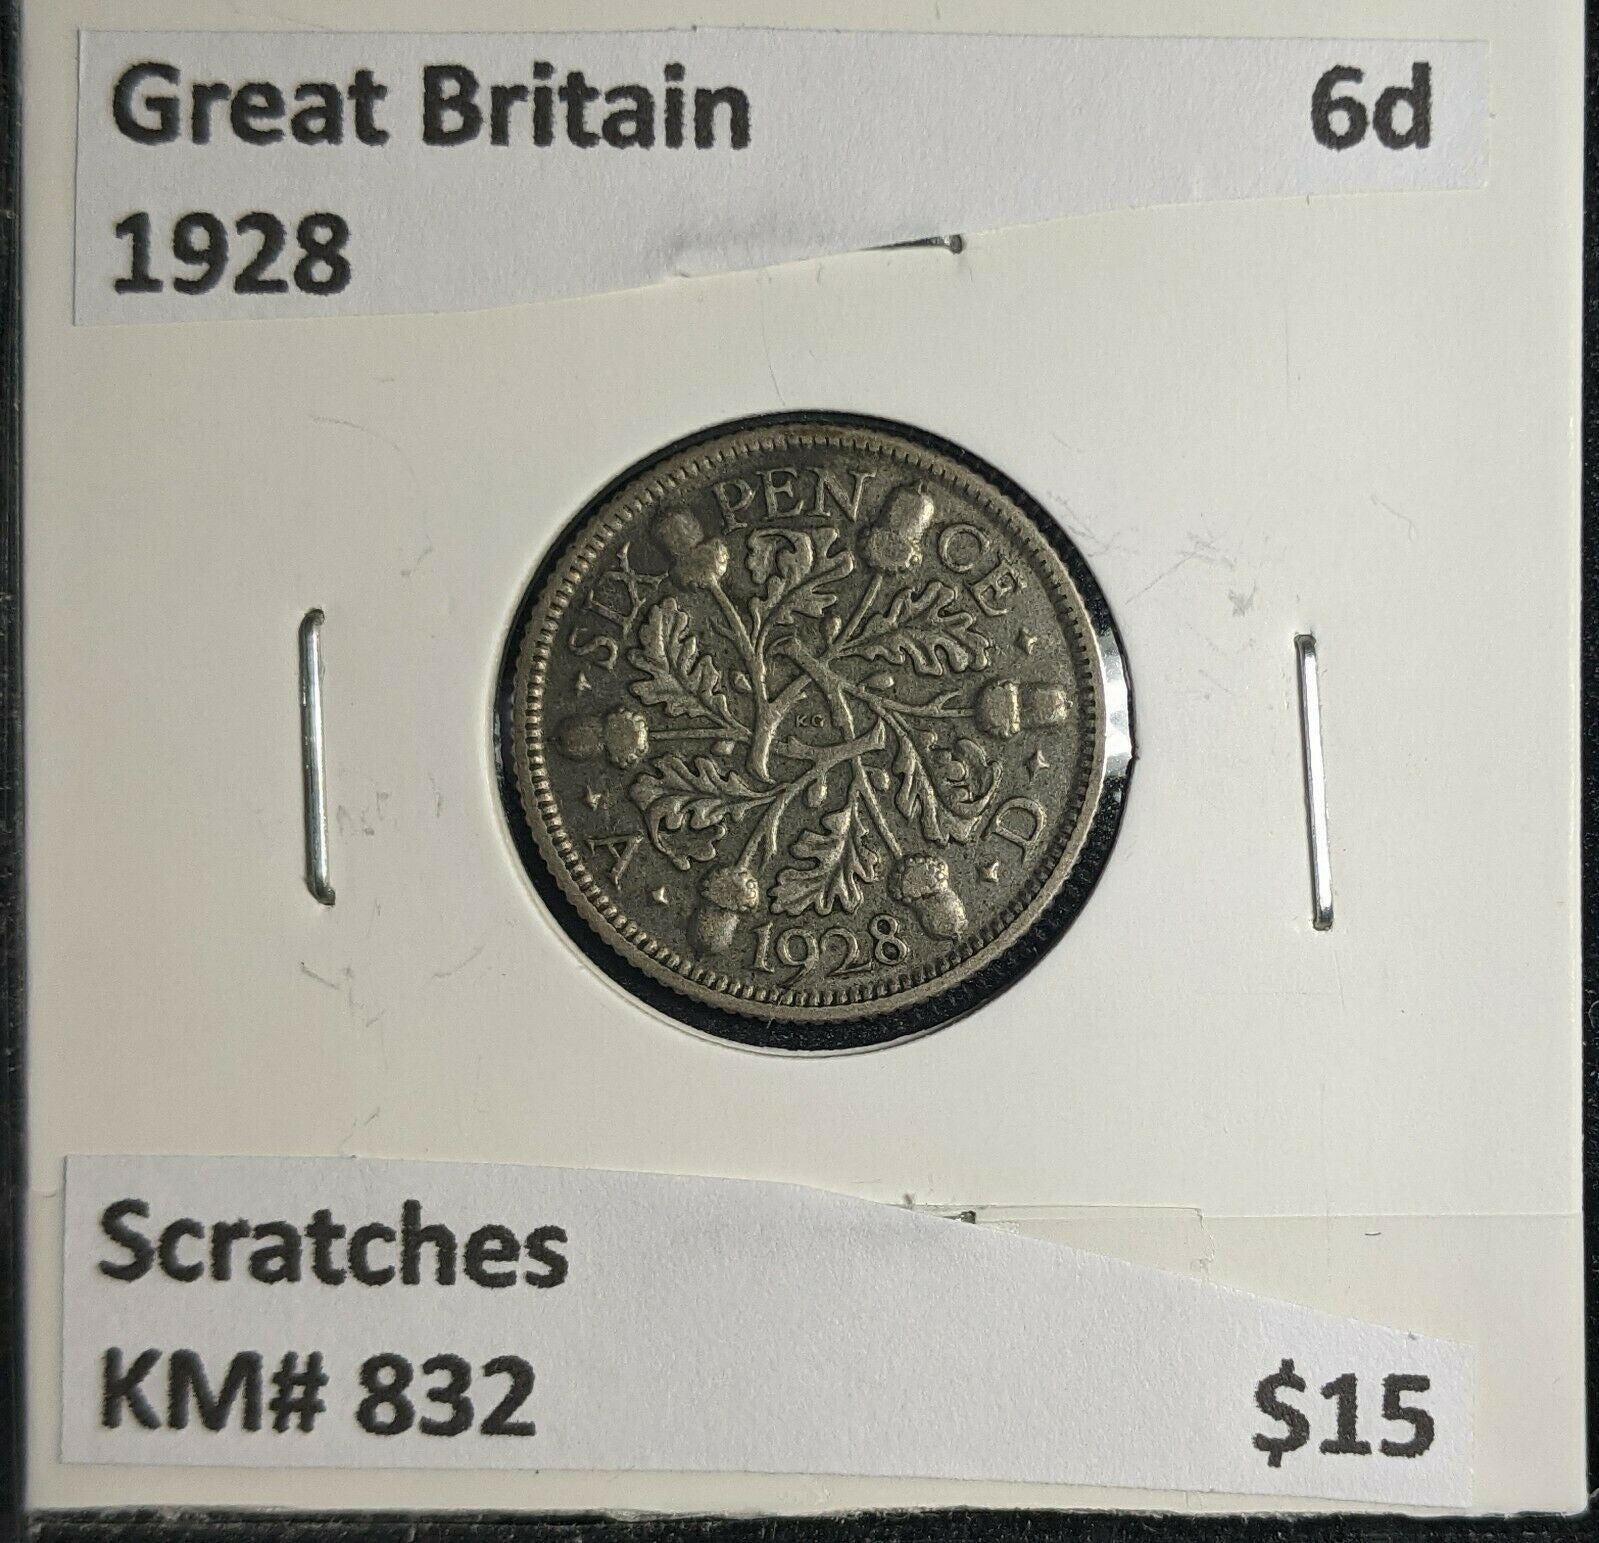 Great Britain 1928 6 Pence Sixpence 6d KM# 832 Scratches #978 4B